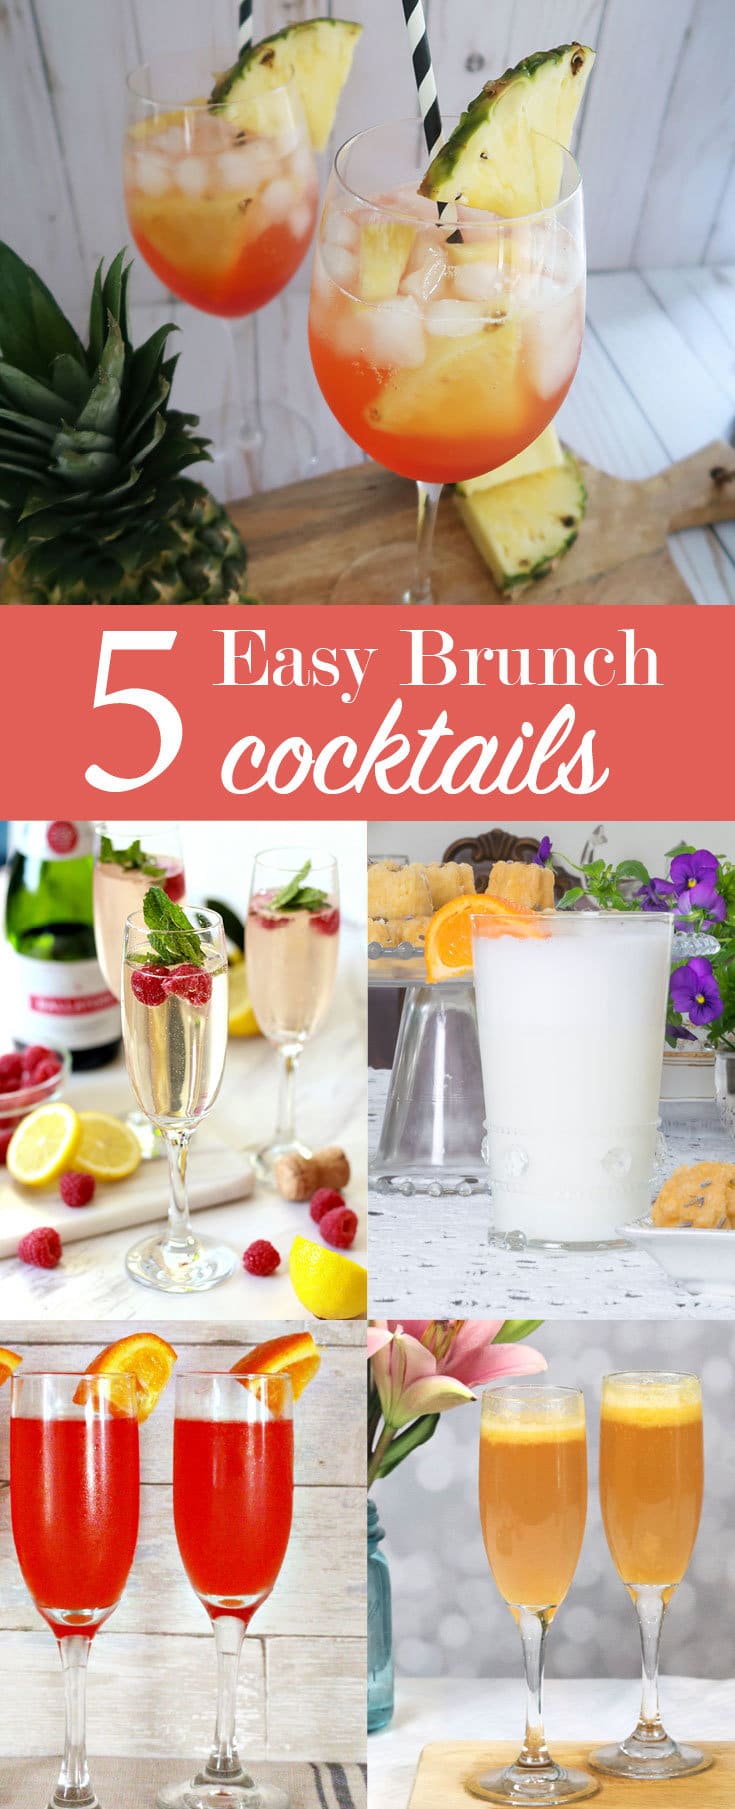 pin showing 5 easy brunch cocktails